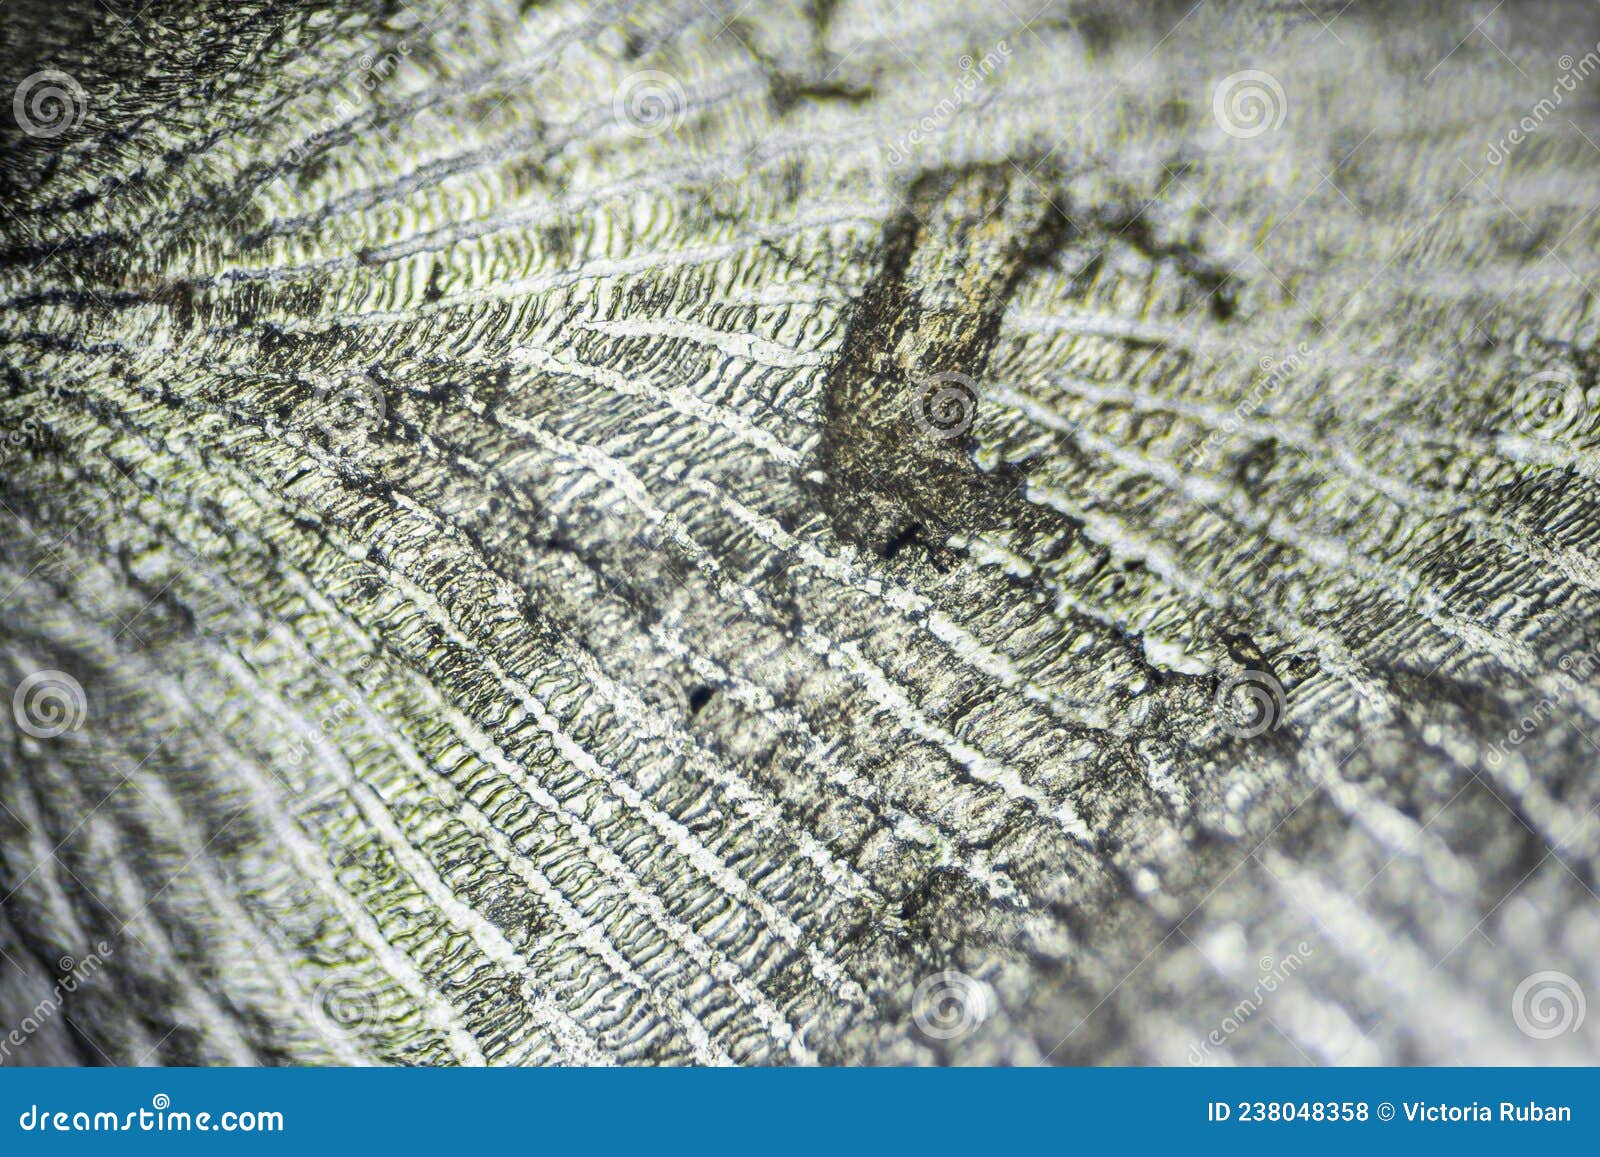 Natural Marine Fish Scale Under a Microscope Stock Photo - Image